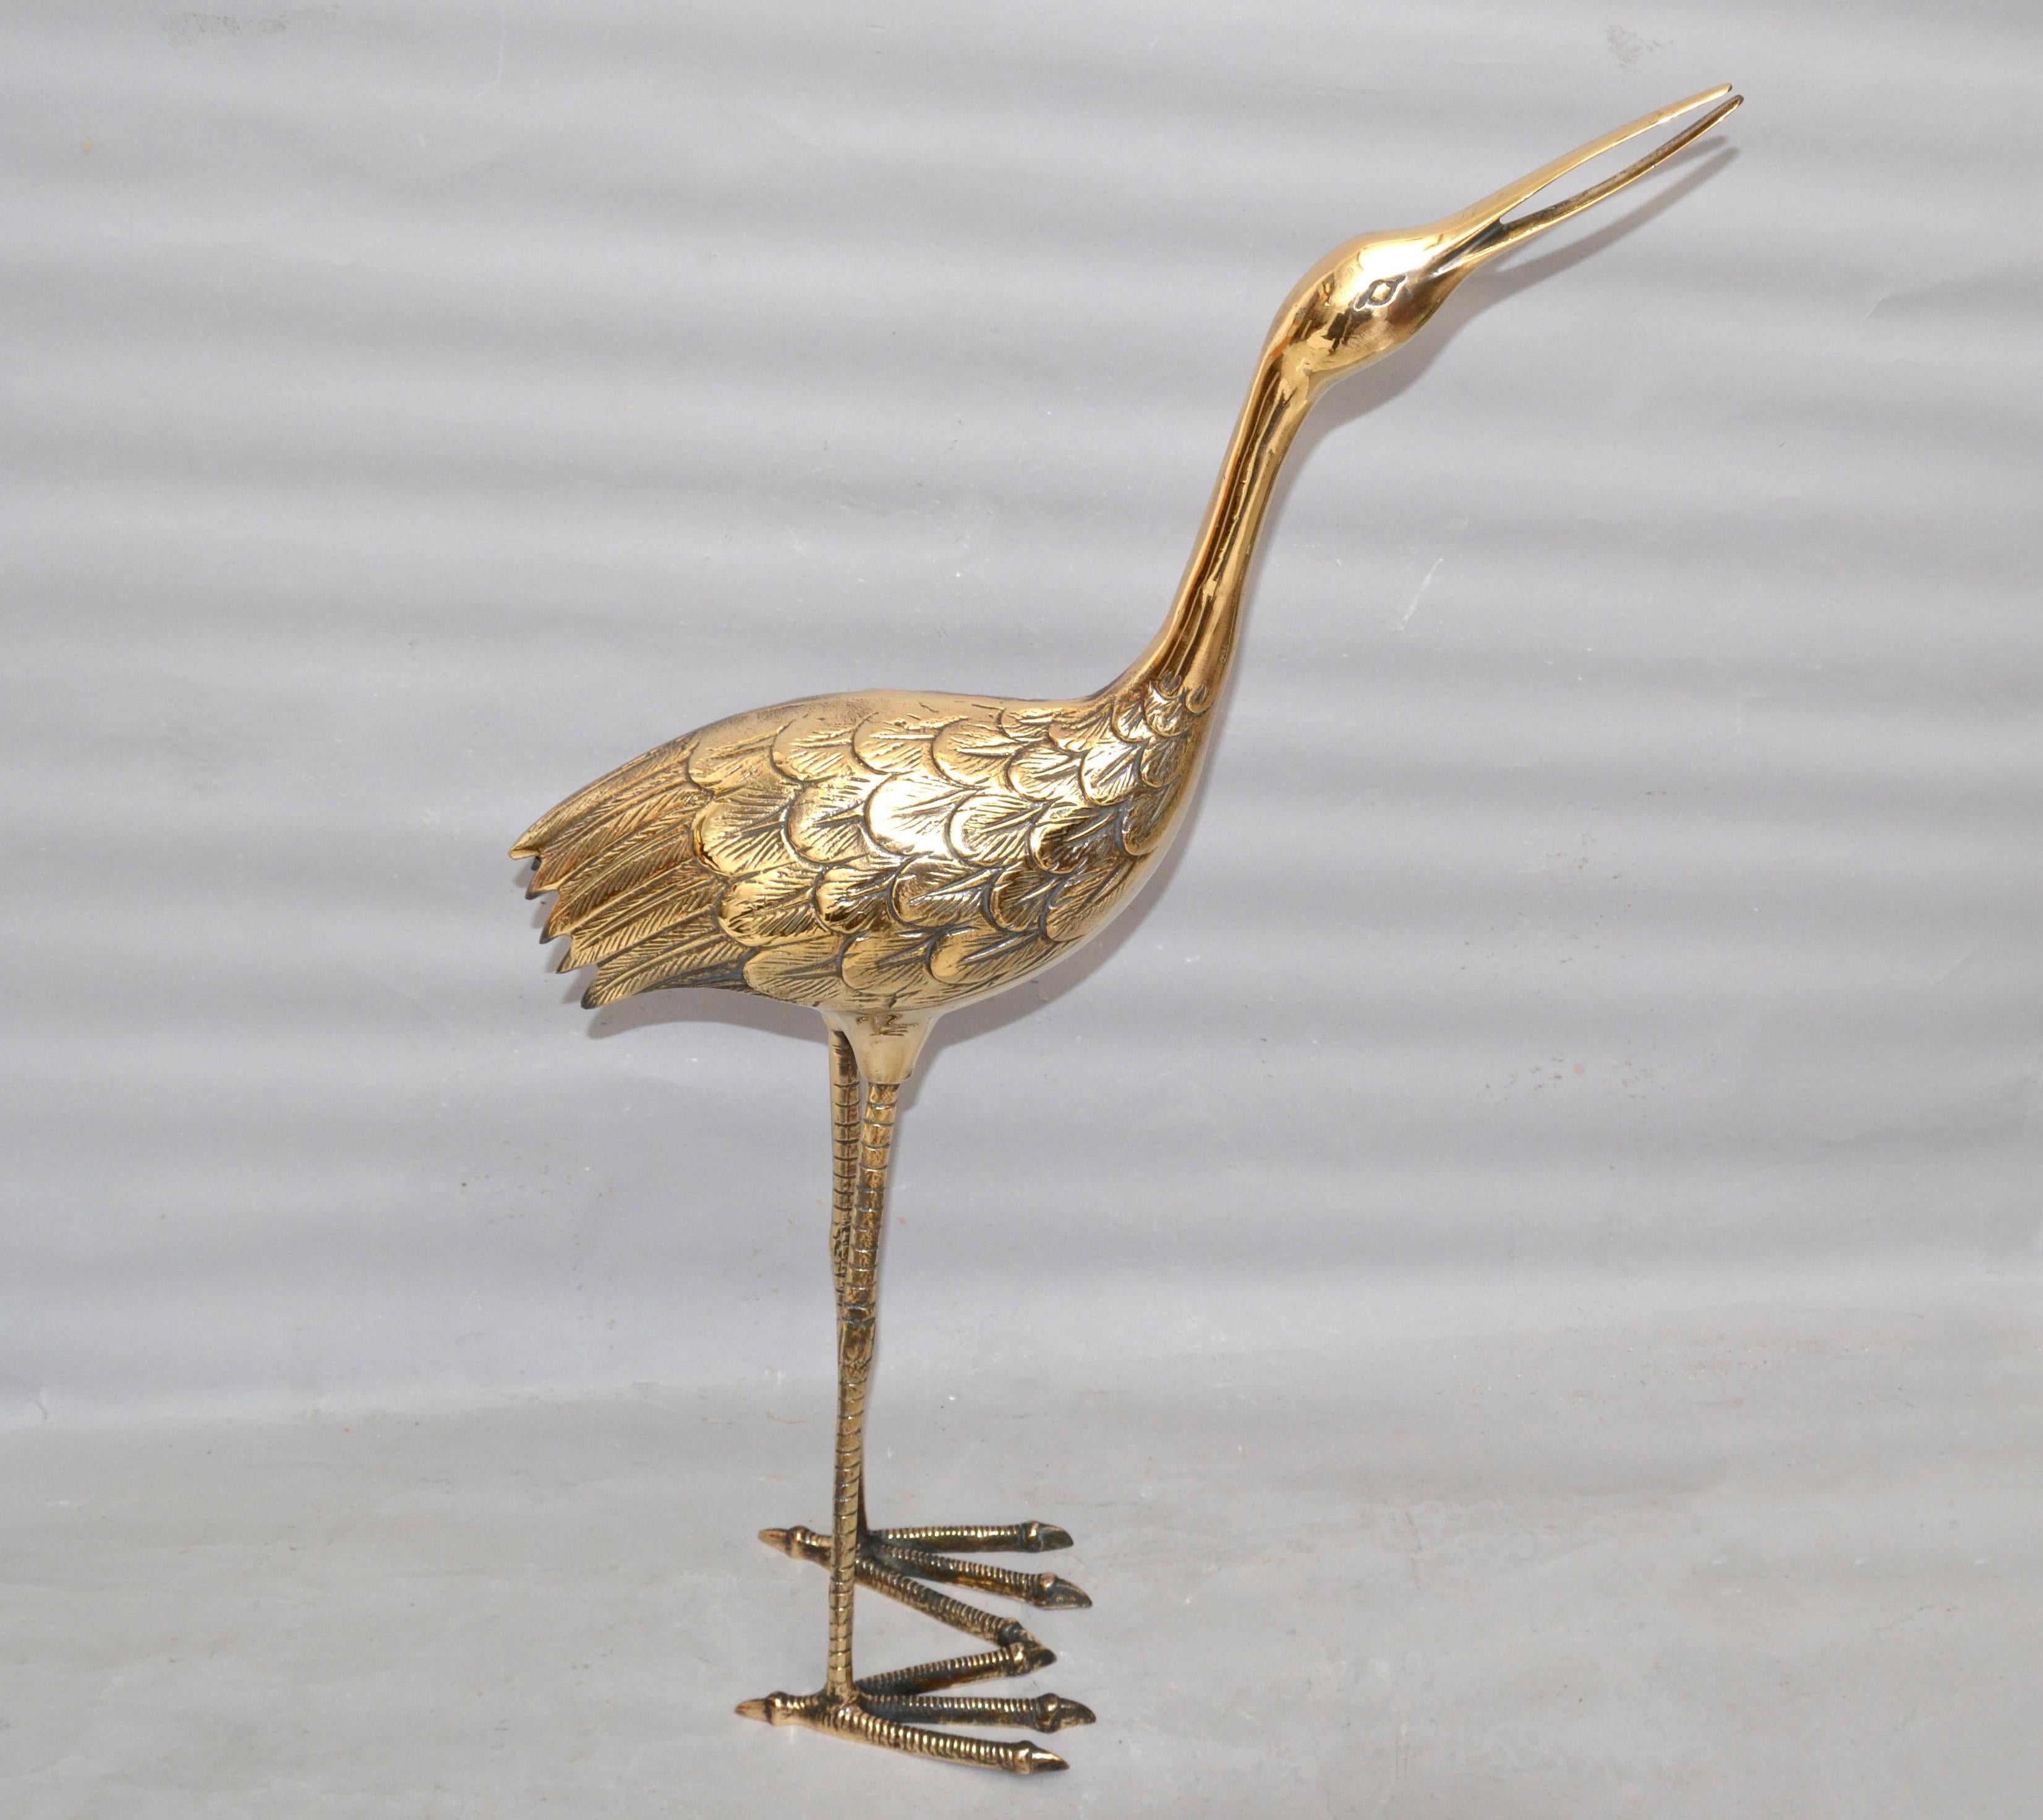 Hand-Crafted Bronze Crane Life-Size Animal Sculpture Handcrafted Mid-Century Modern, 1970 For Sale